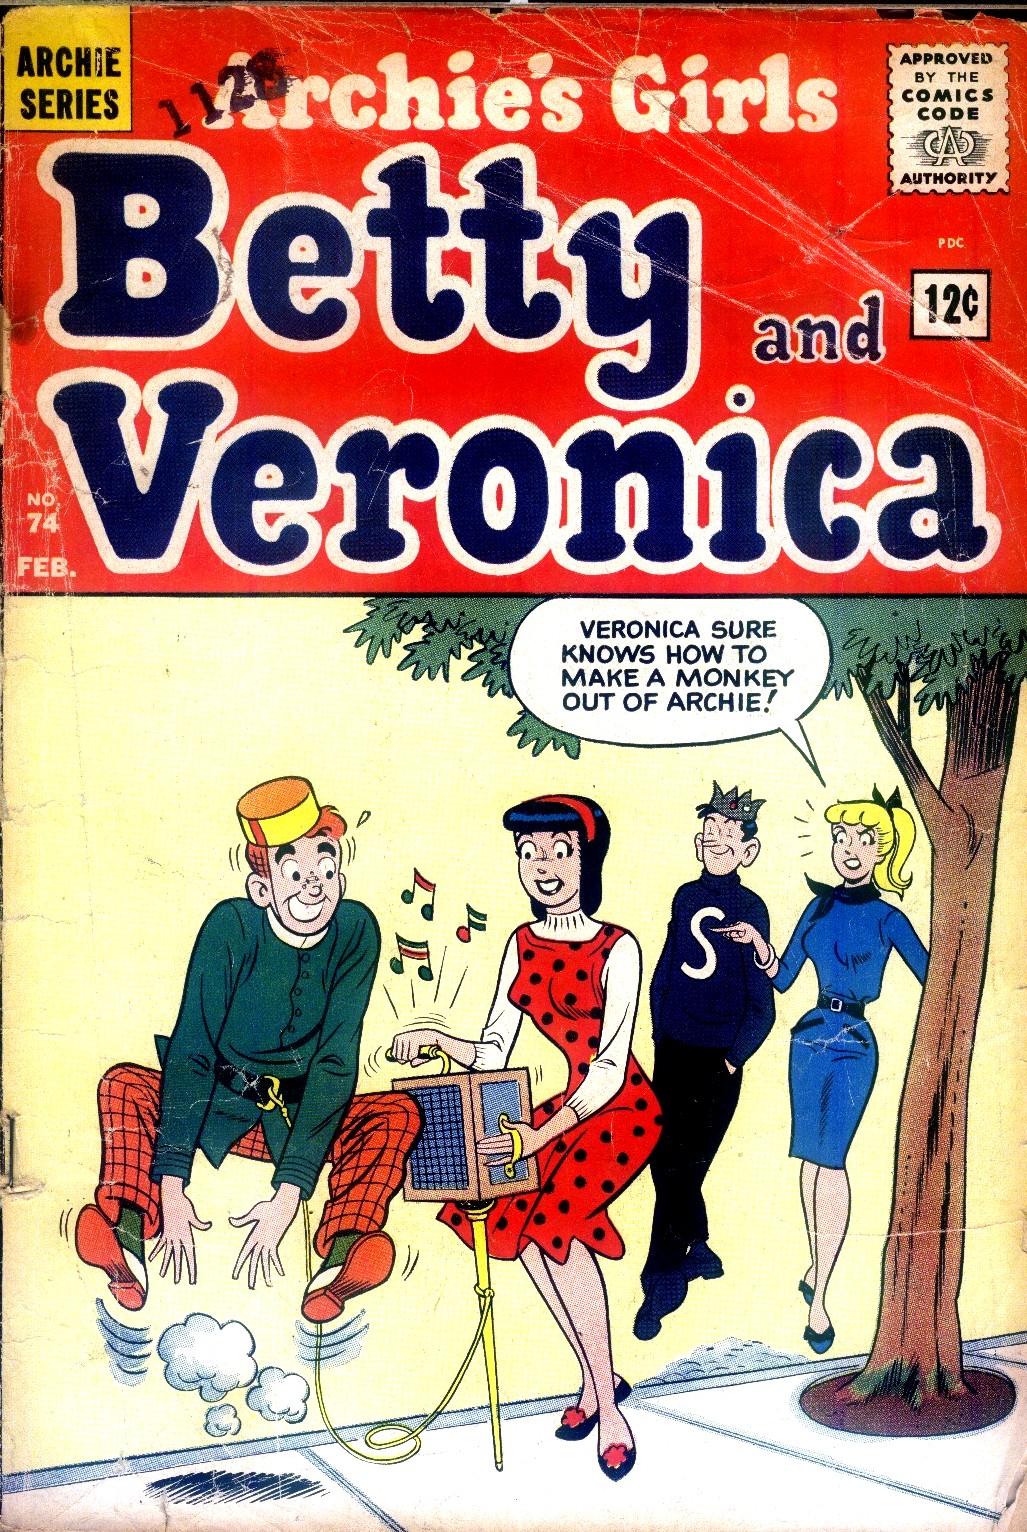 Read online Archie's Girls Betty and Veronica comic -  Issue #74 - 1